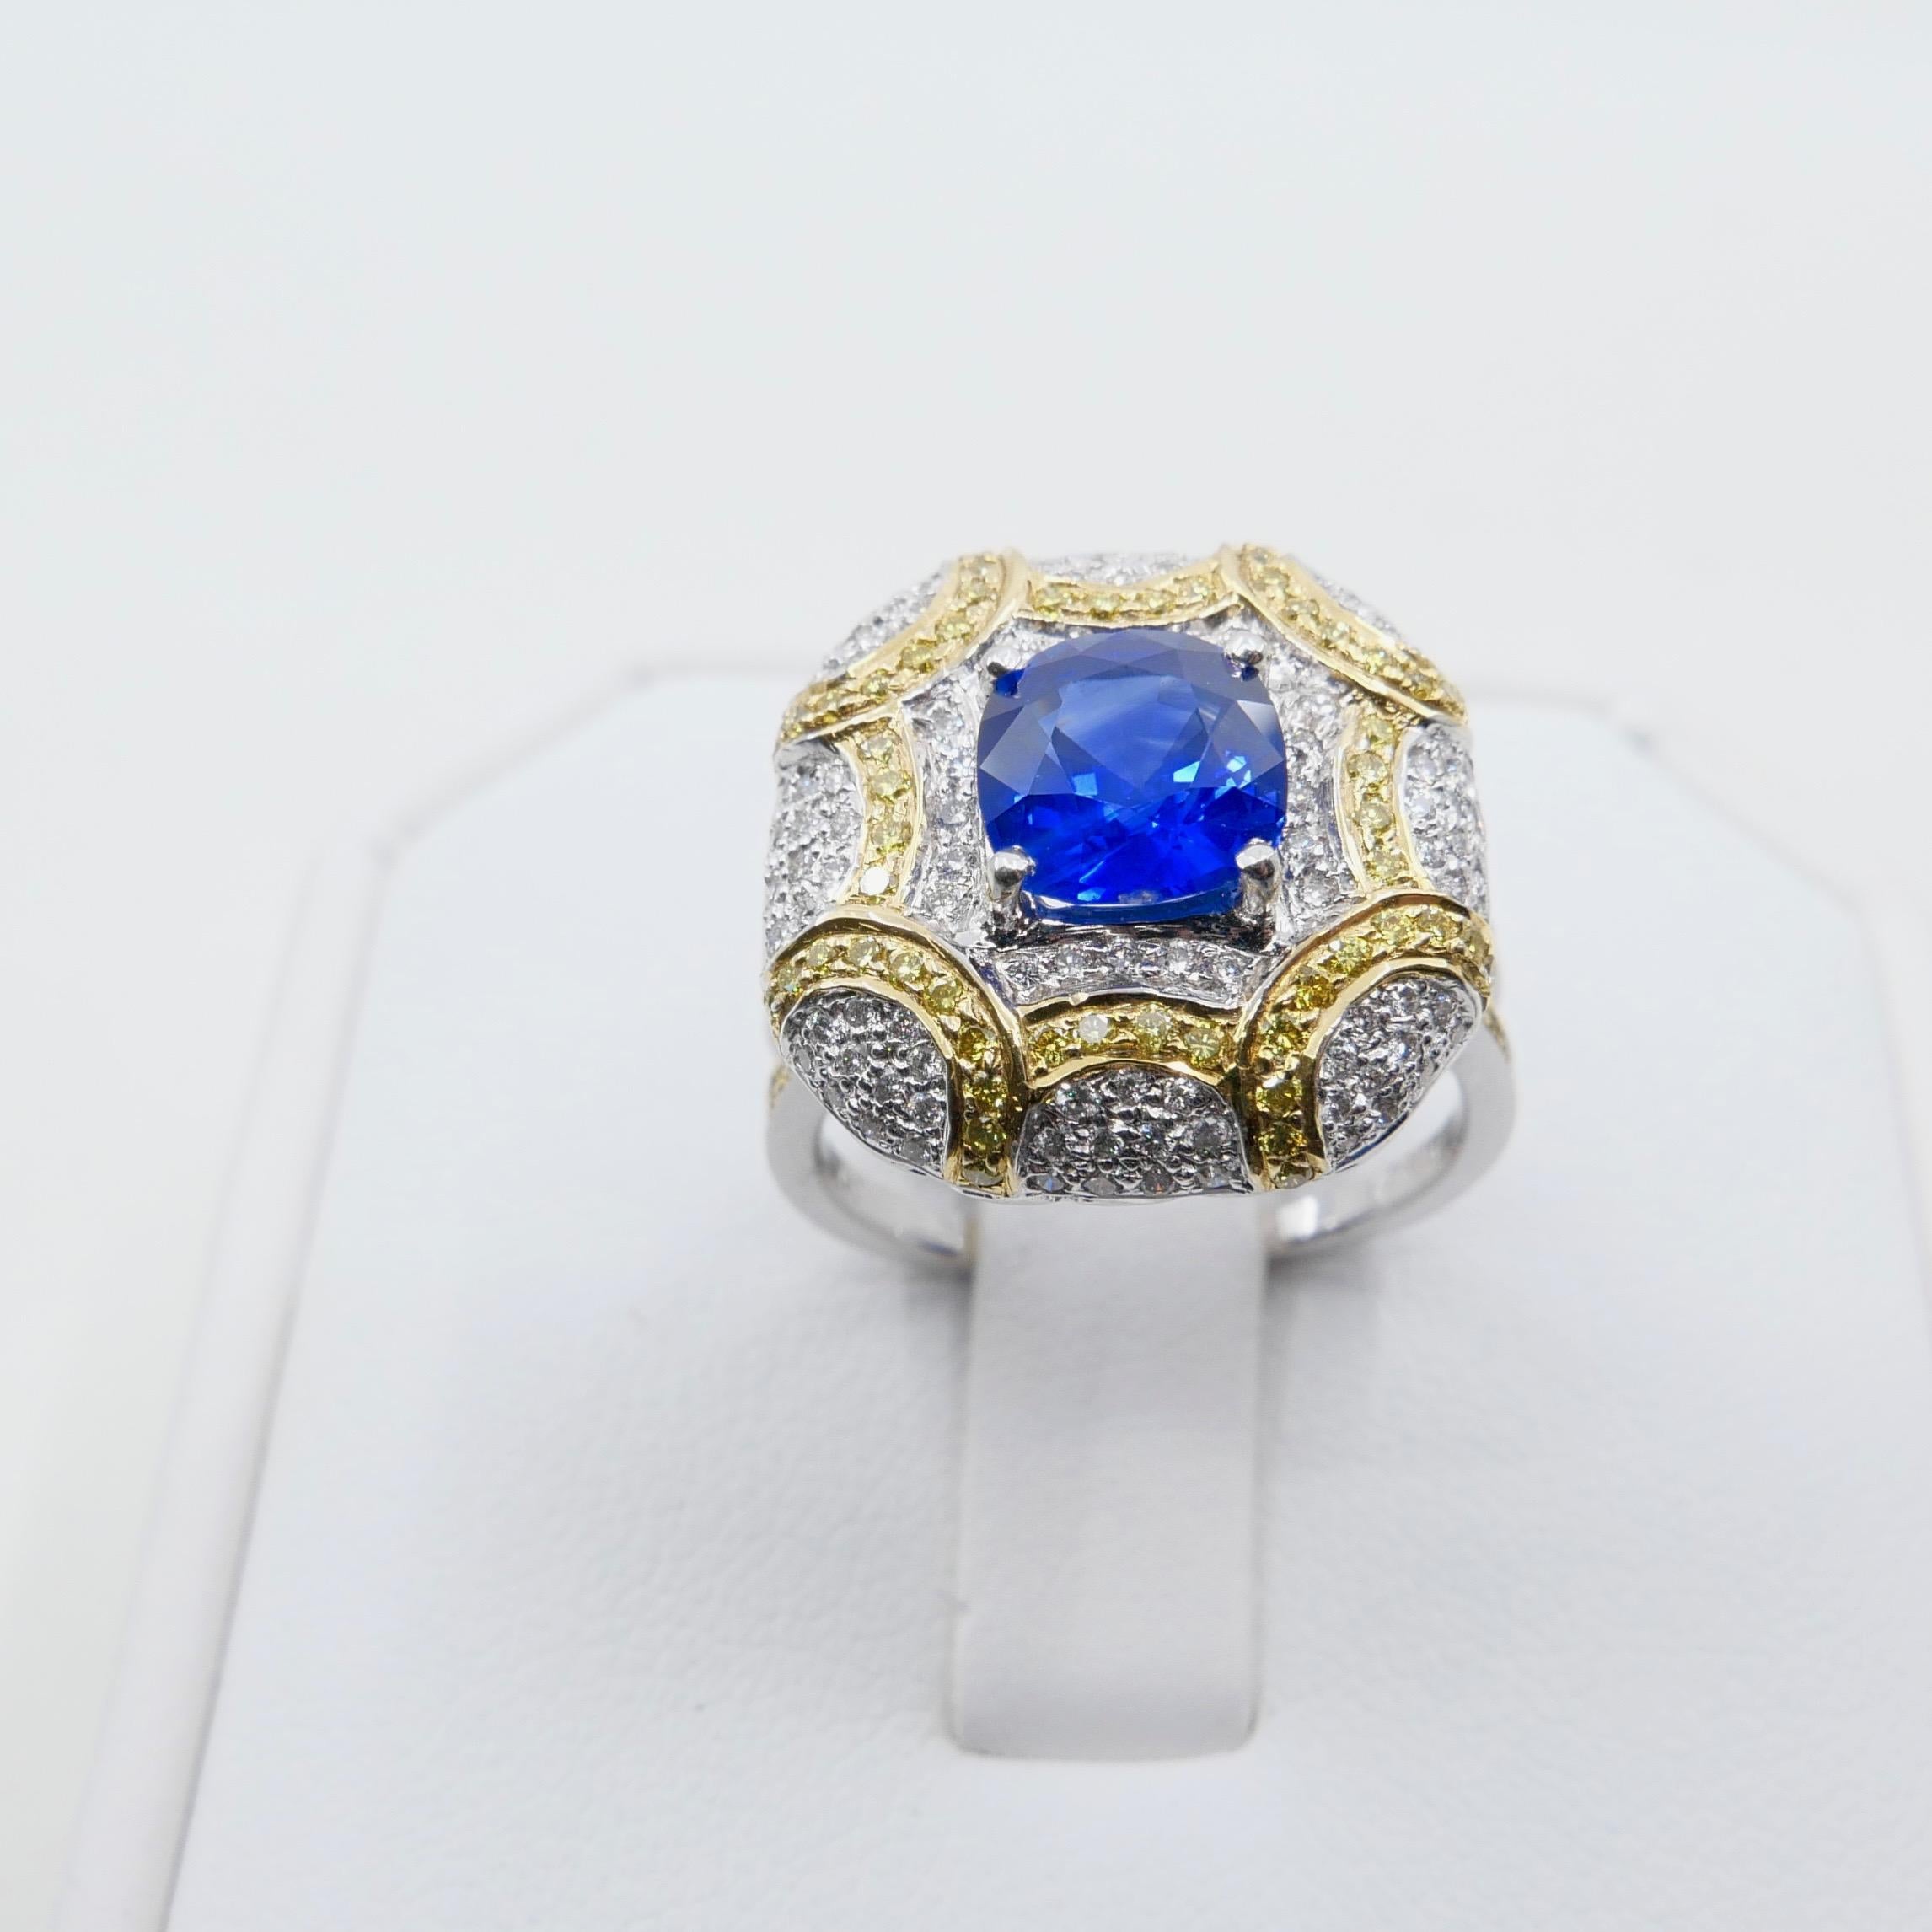 Women's or Men's ICA Certified 1.74Cts Ceylon Heat Sapphire Ring, White and Fancy Yellow Diamonds For Sale